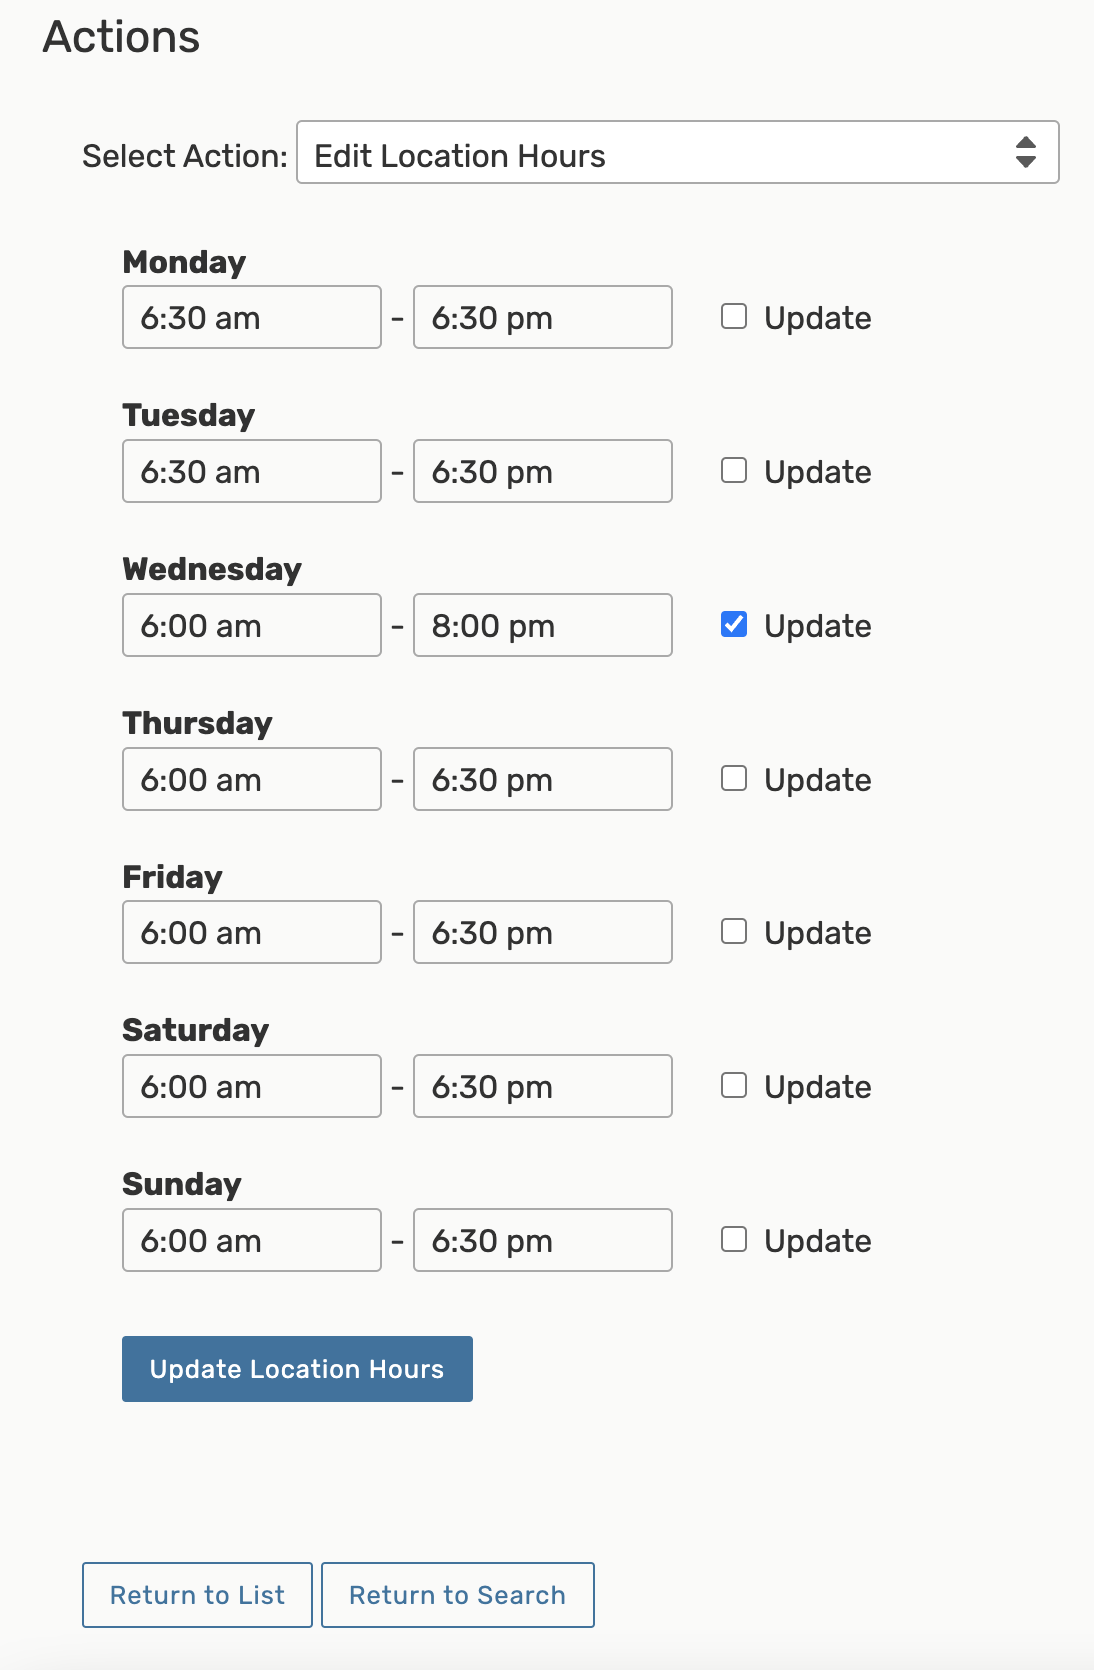 Update location hours options